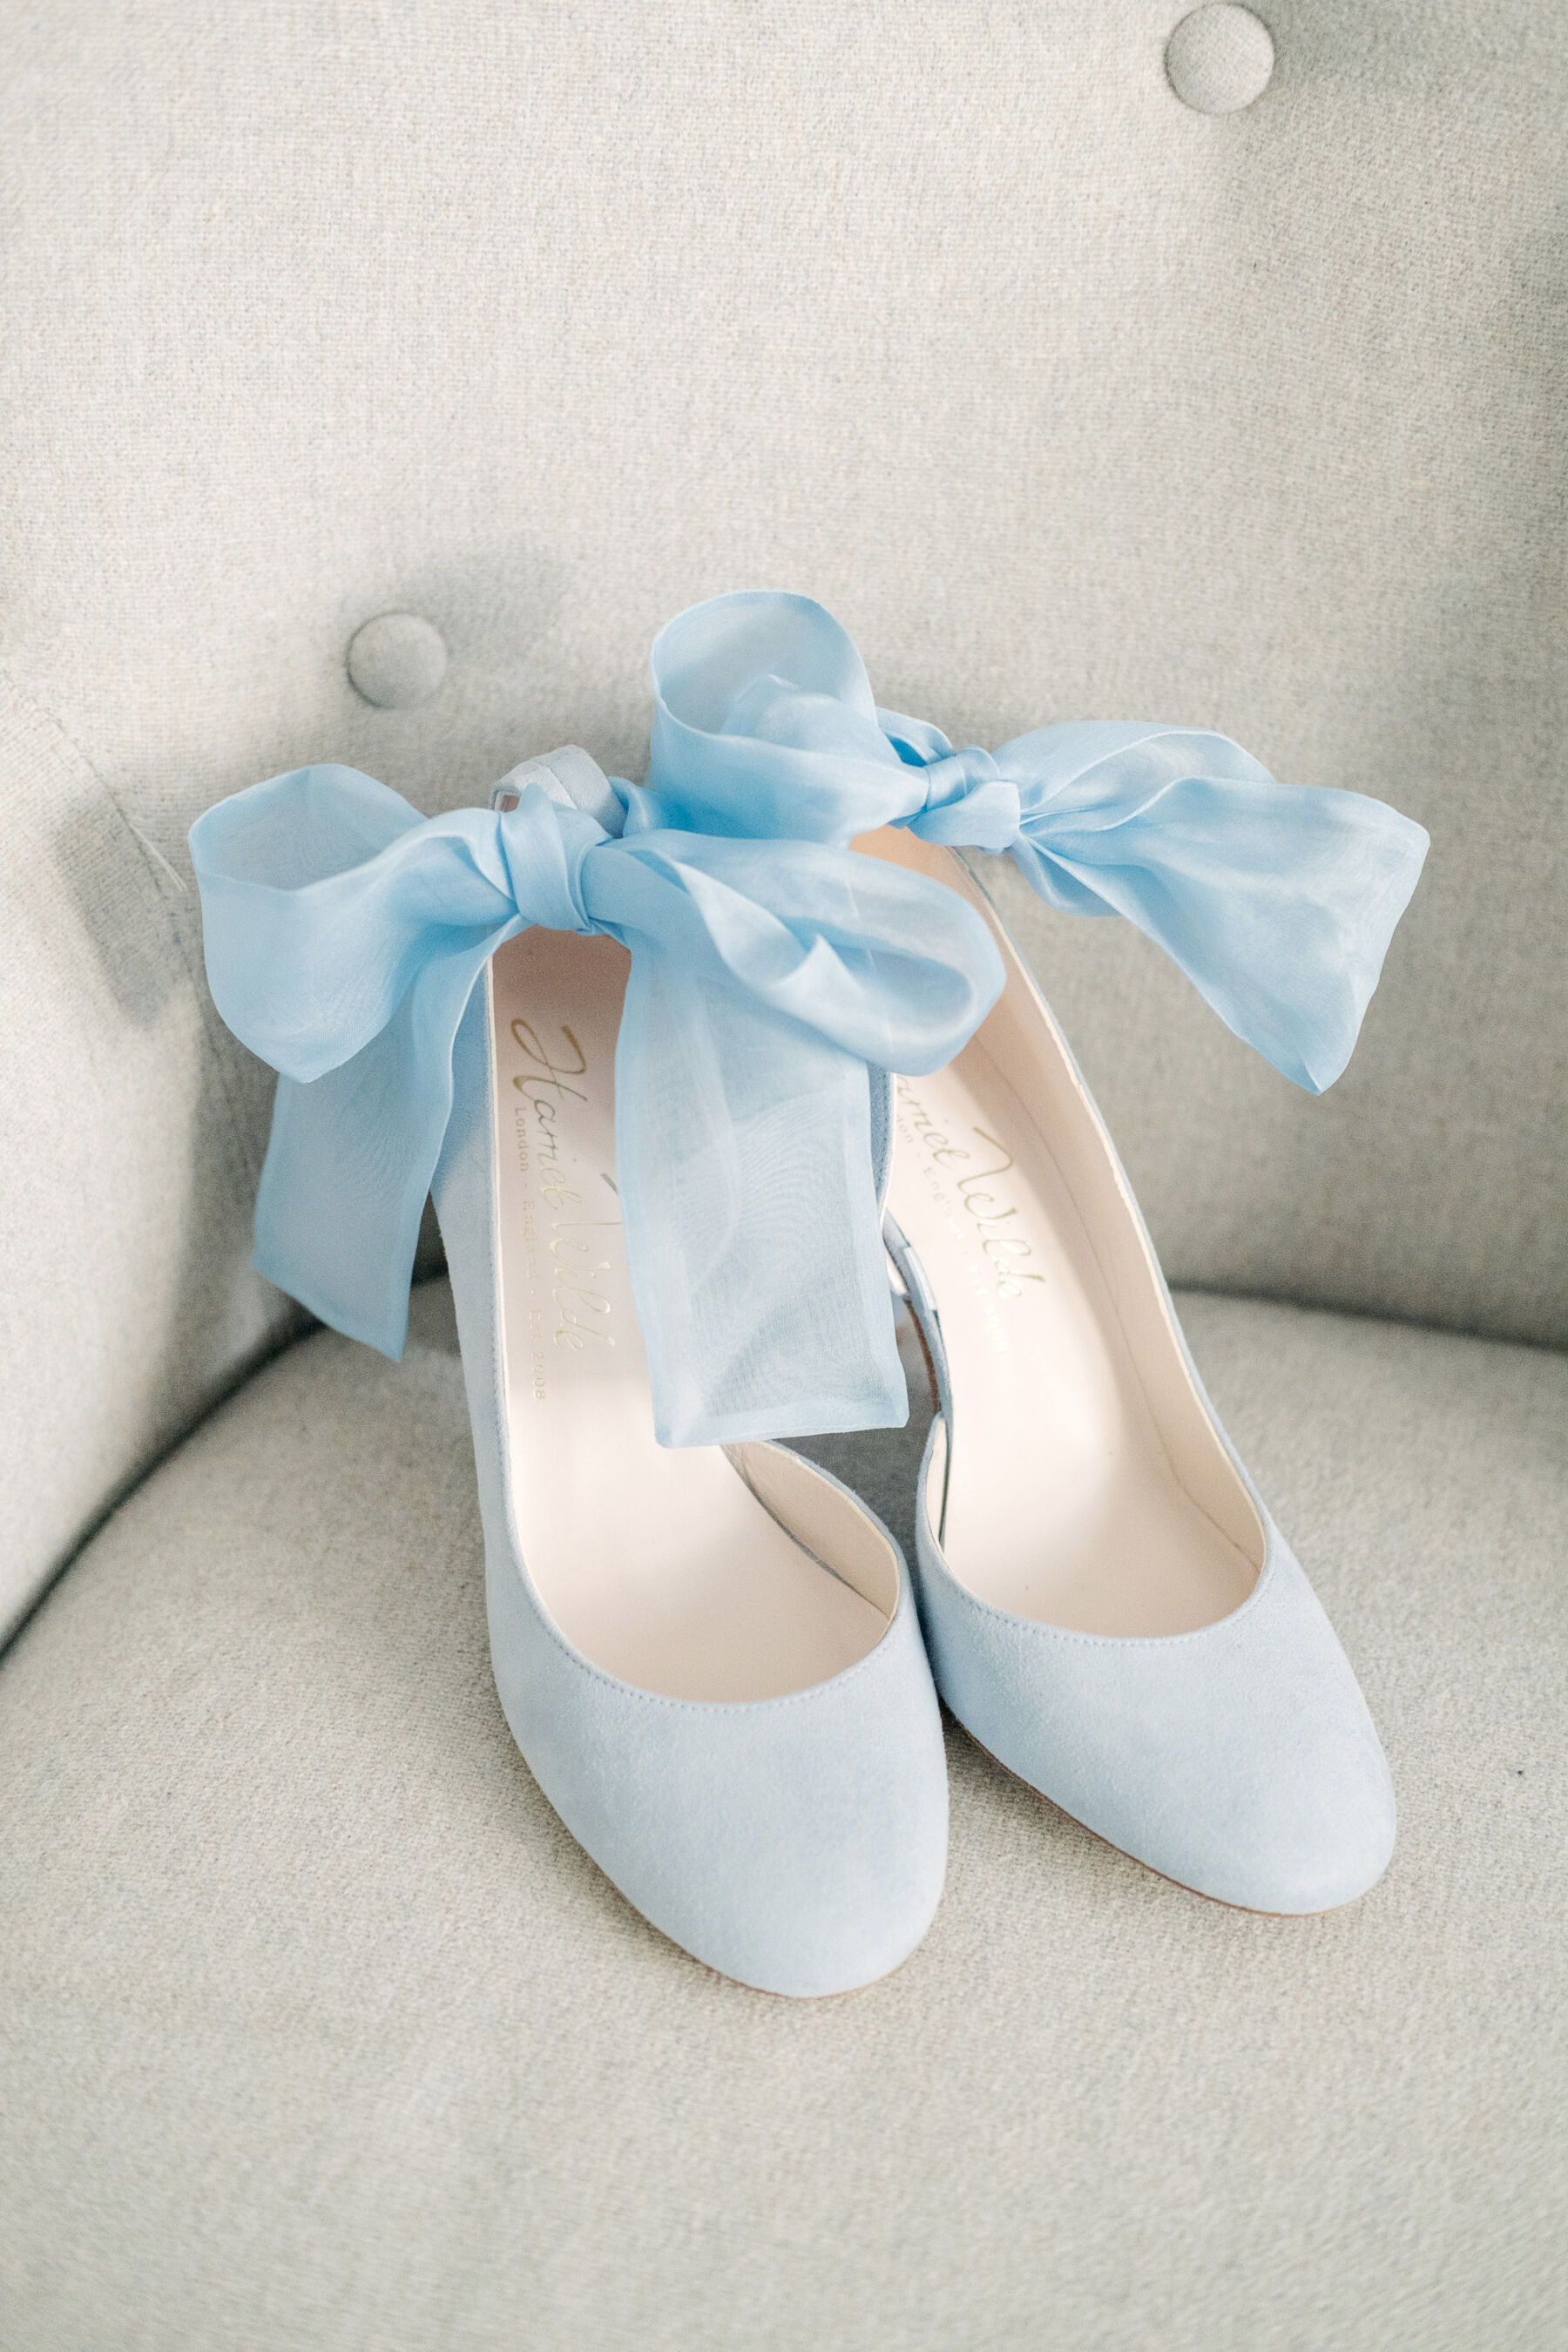 Pale blue velvet wedding shoes with ankle ribbon ties by Harriet Wilde.